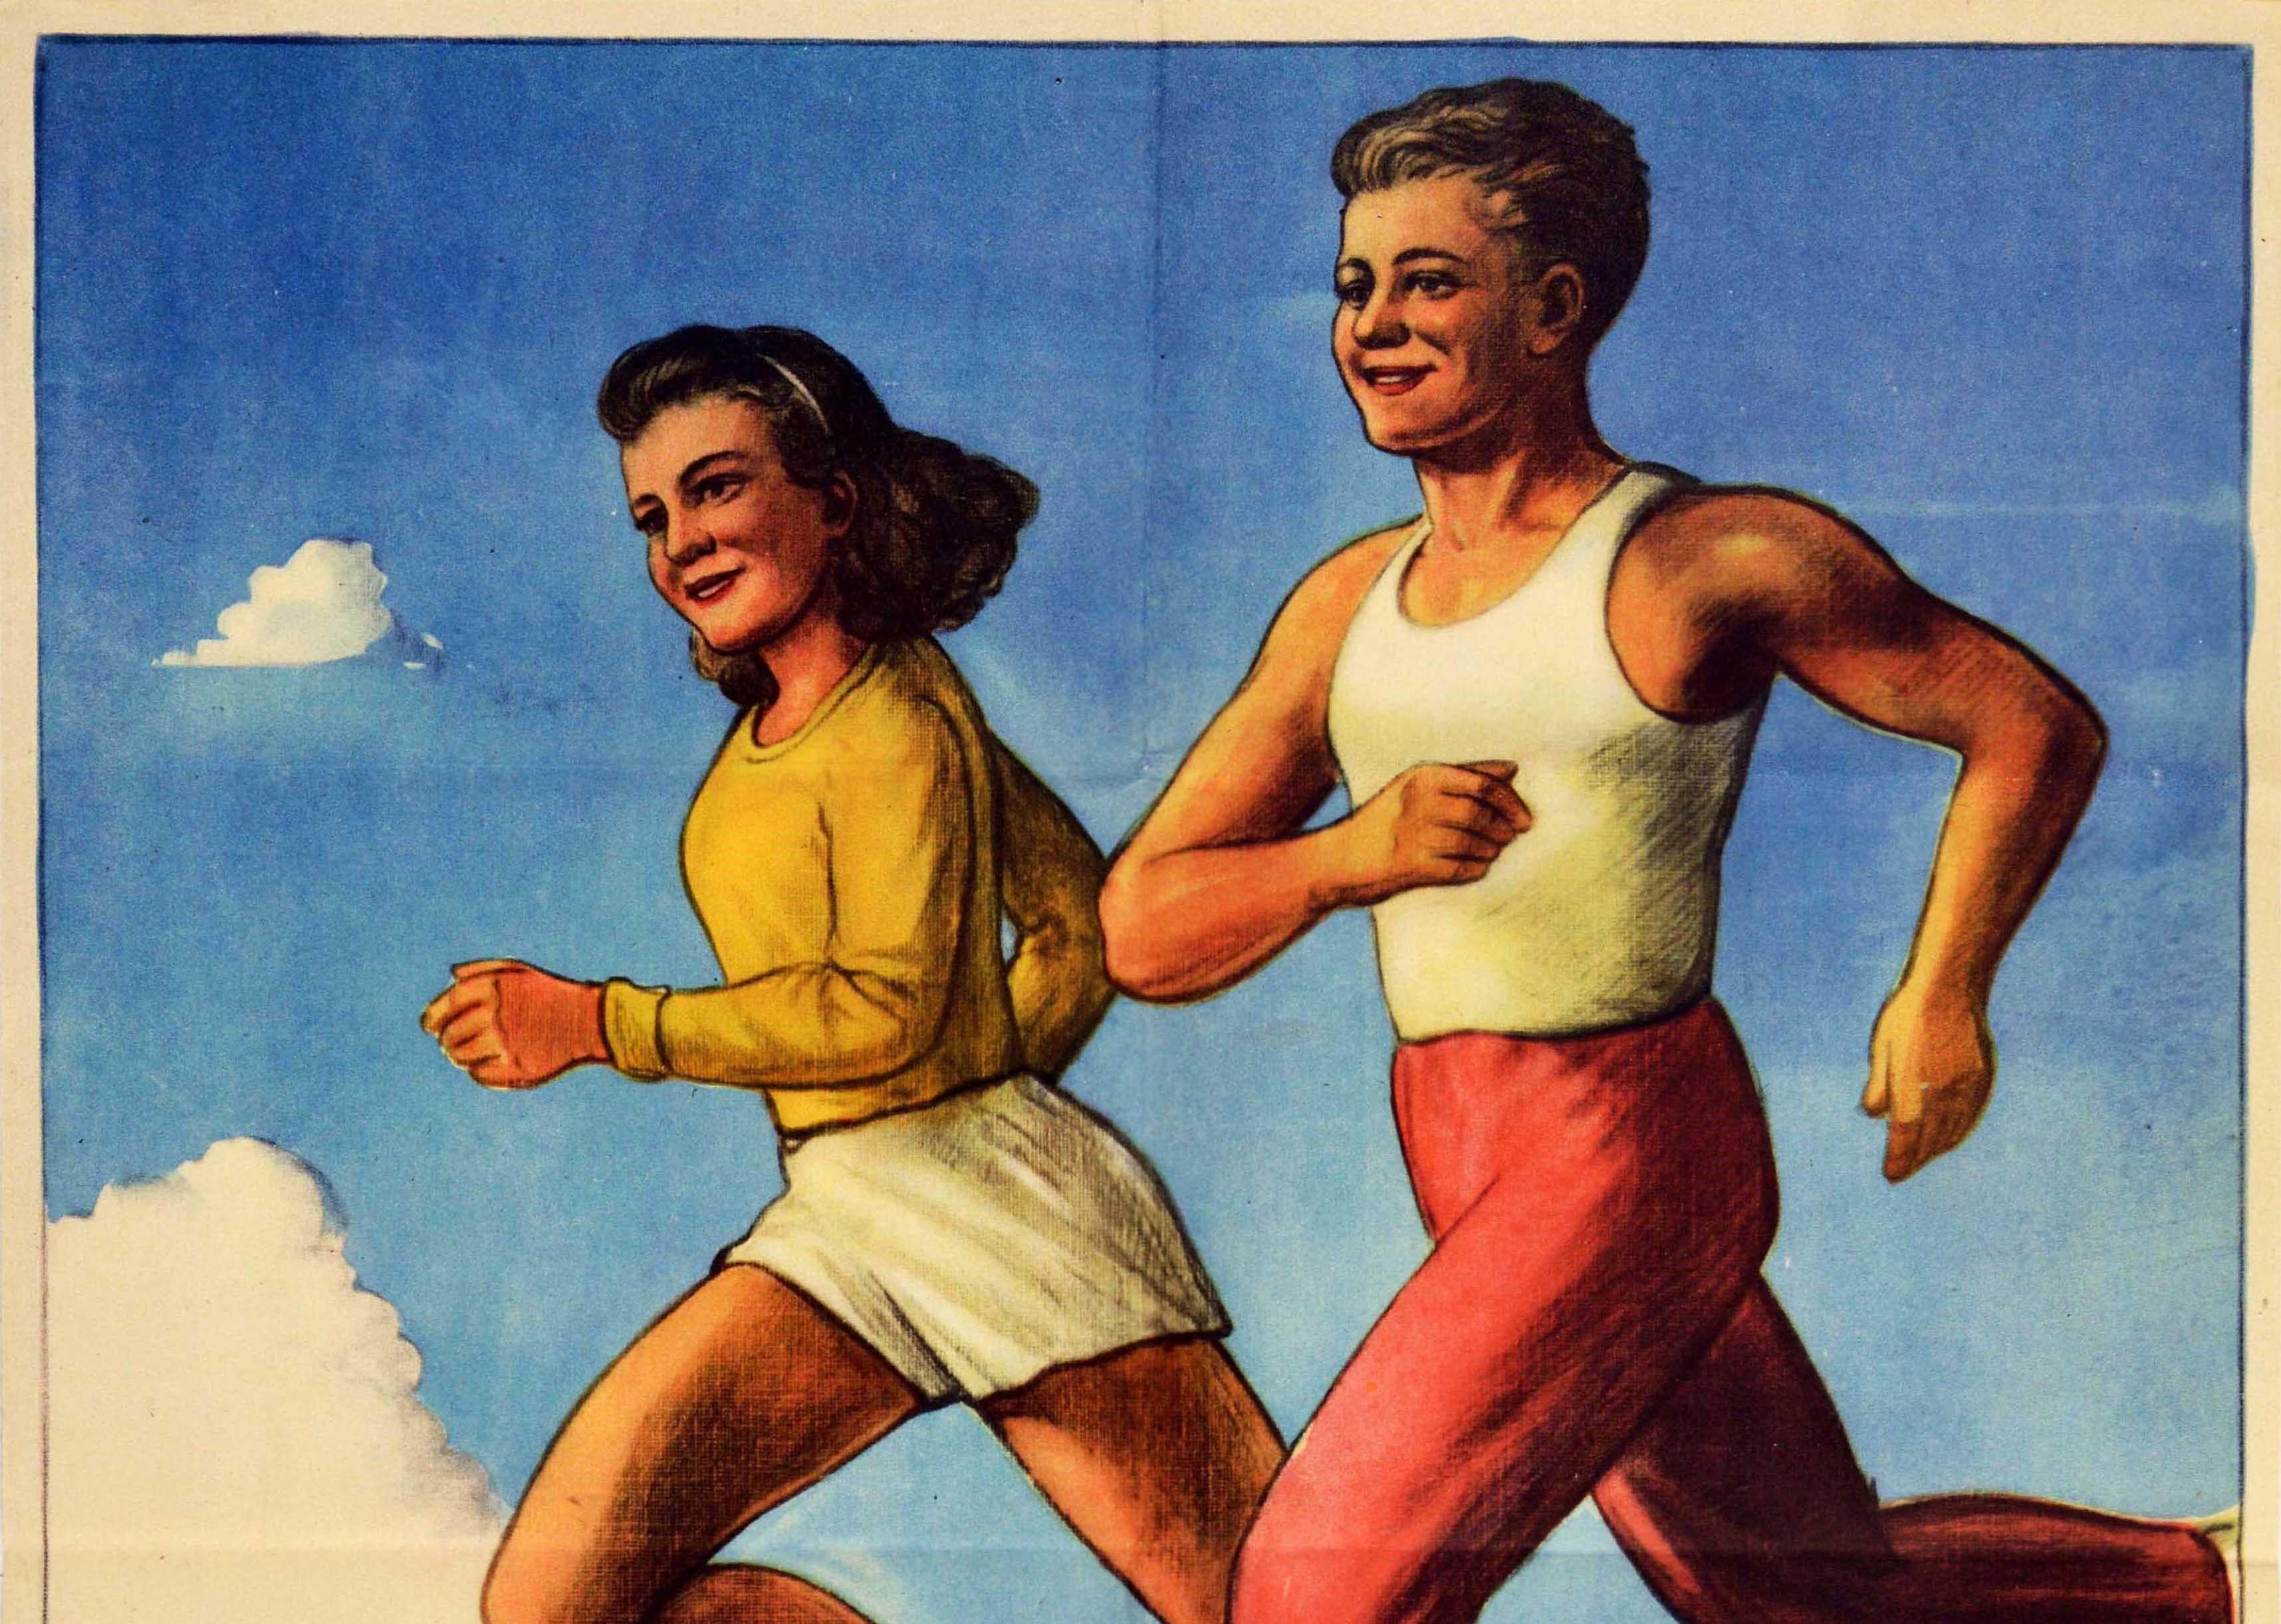 Original vintage sports propaganda poster - Athletic Youth a healthy nation, a happy life at work and peace / Sportovni mladez zdravy narod, stastny zivot v praci a miru - featuring a smiling boy and girl running in the foreground with people